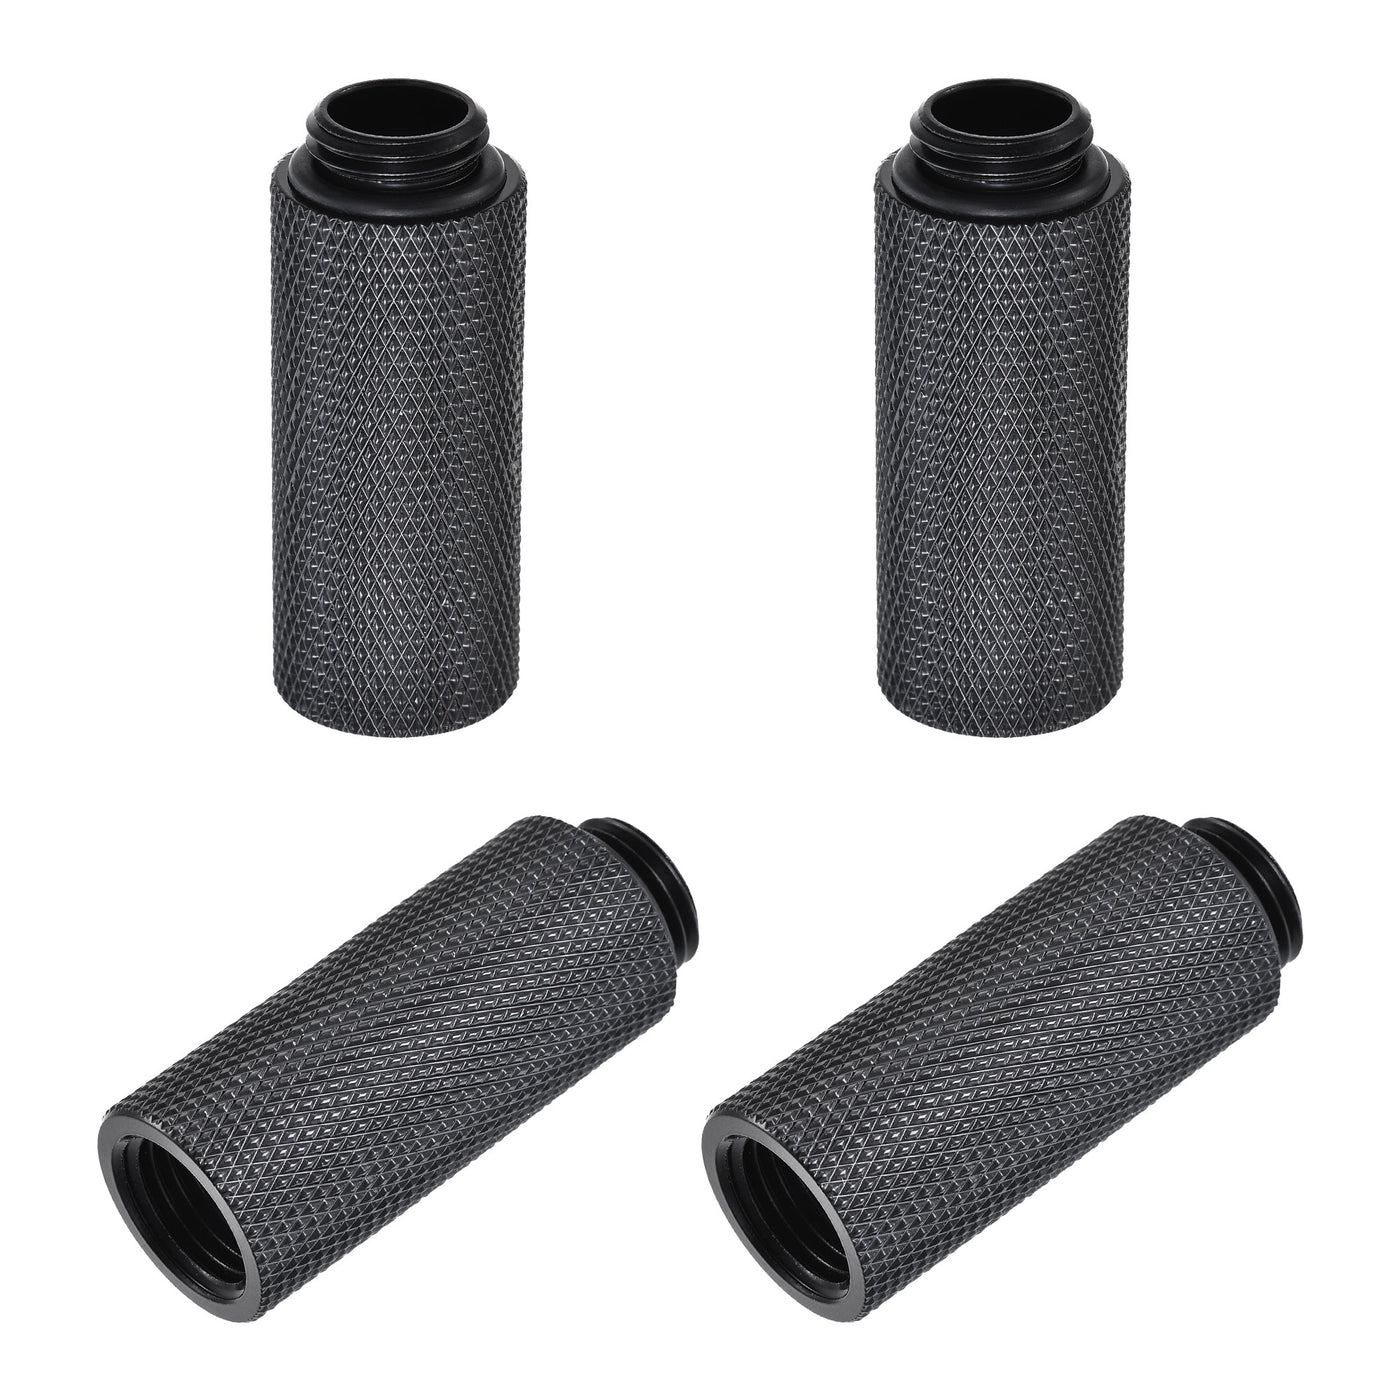 uxcell Uxcell Male to Female Extender Fitting G1/4 x 40mm for Water Cooling System Black 4pcs